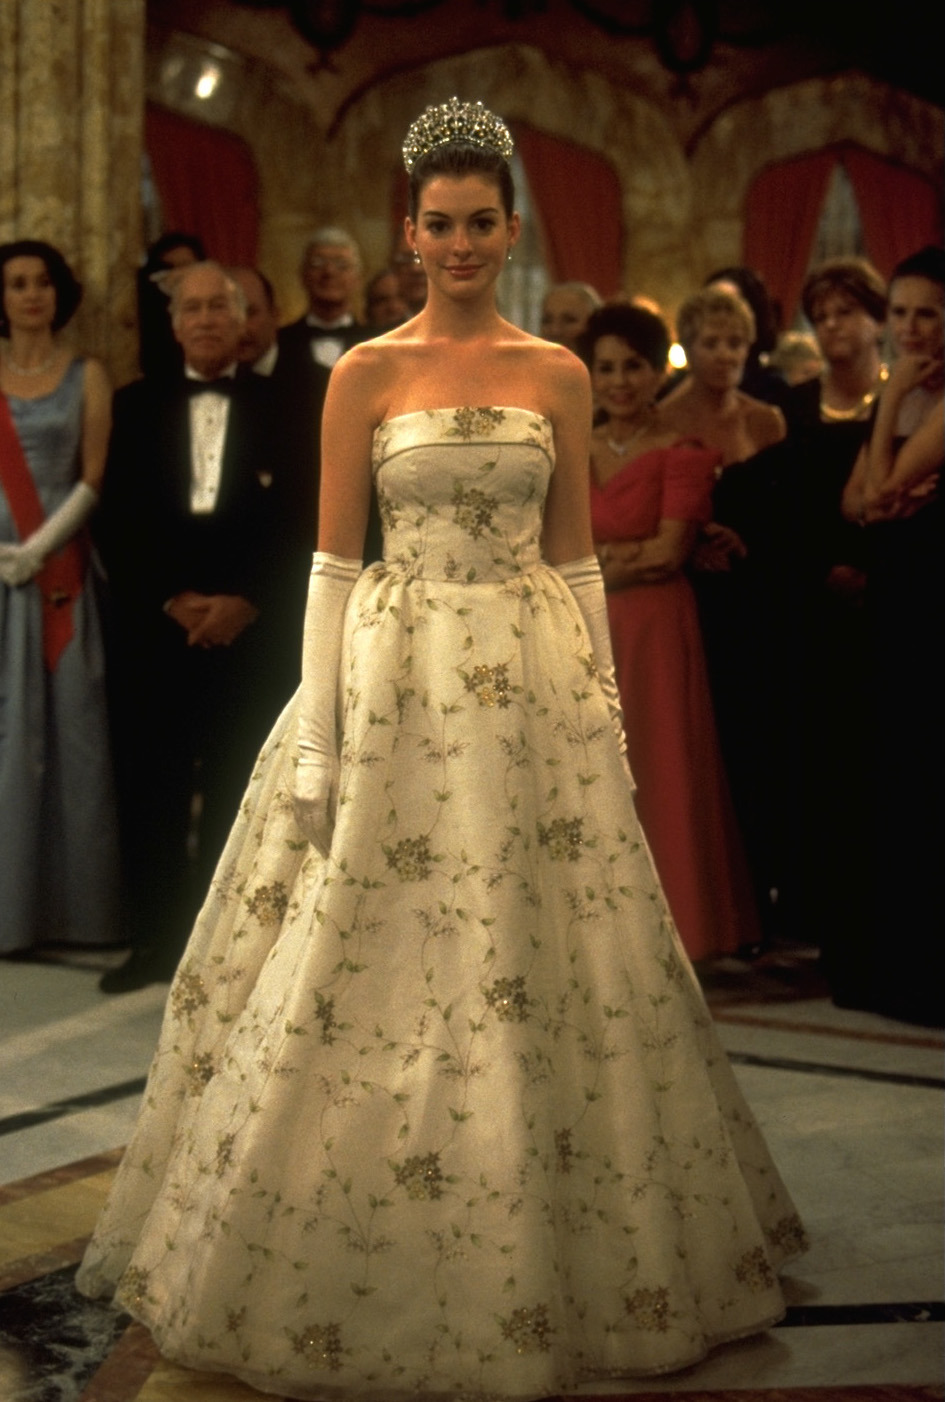 Costume Lovers — Princess Mia's (Anne Hathaway) Ballgown… The...